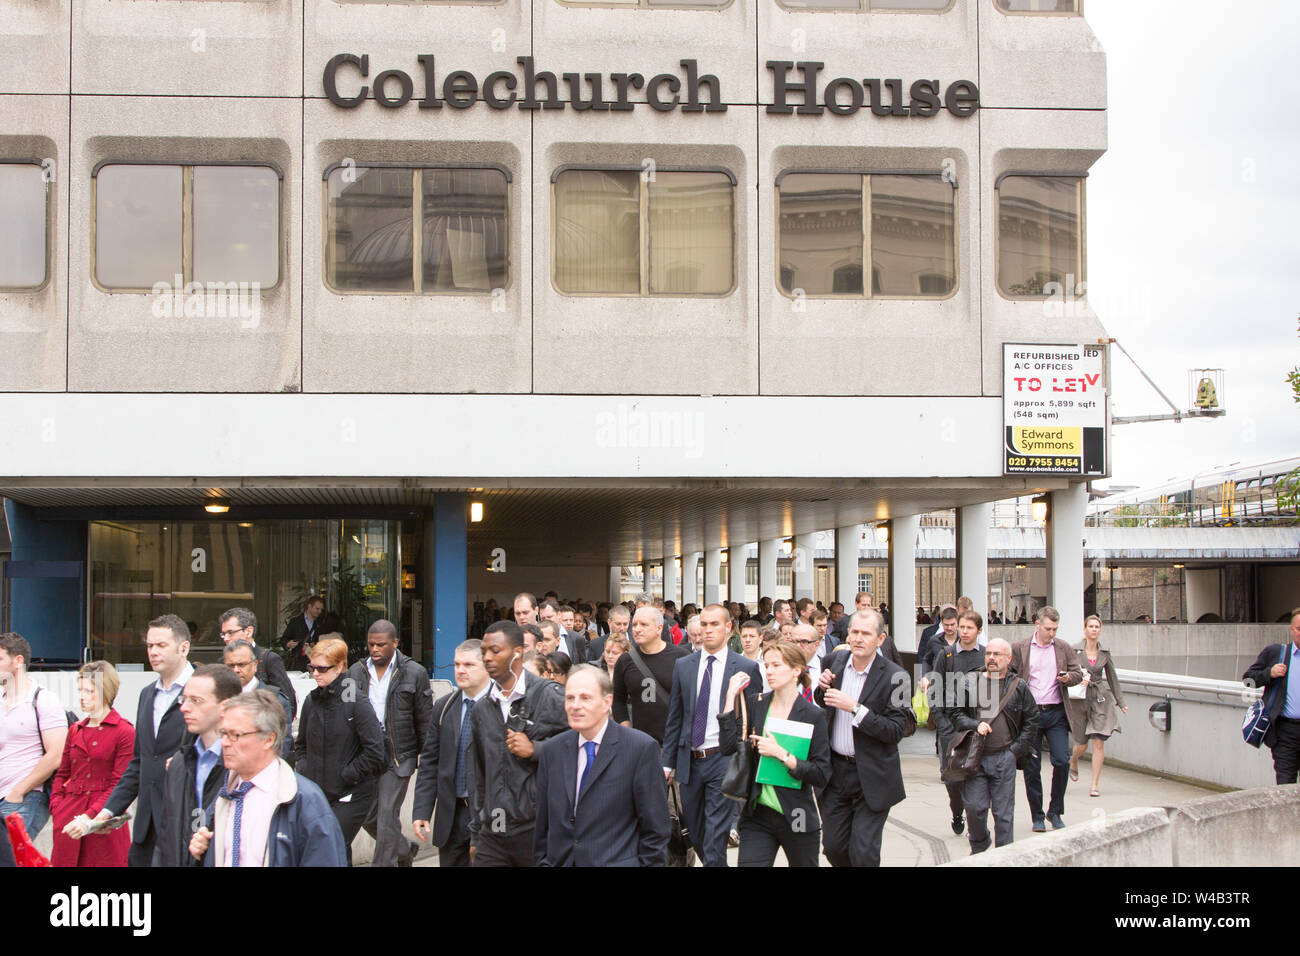 Colechurch house lines of city workers emerge Stock Photo